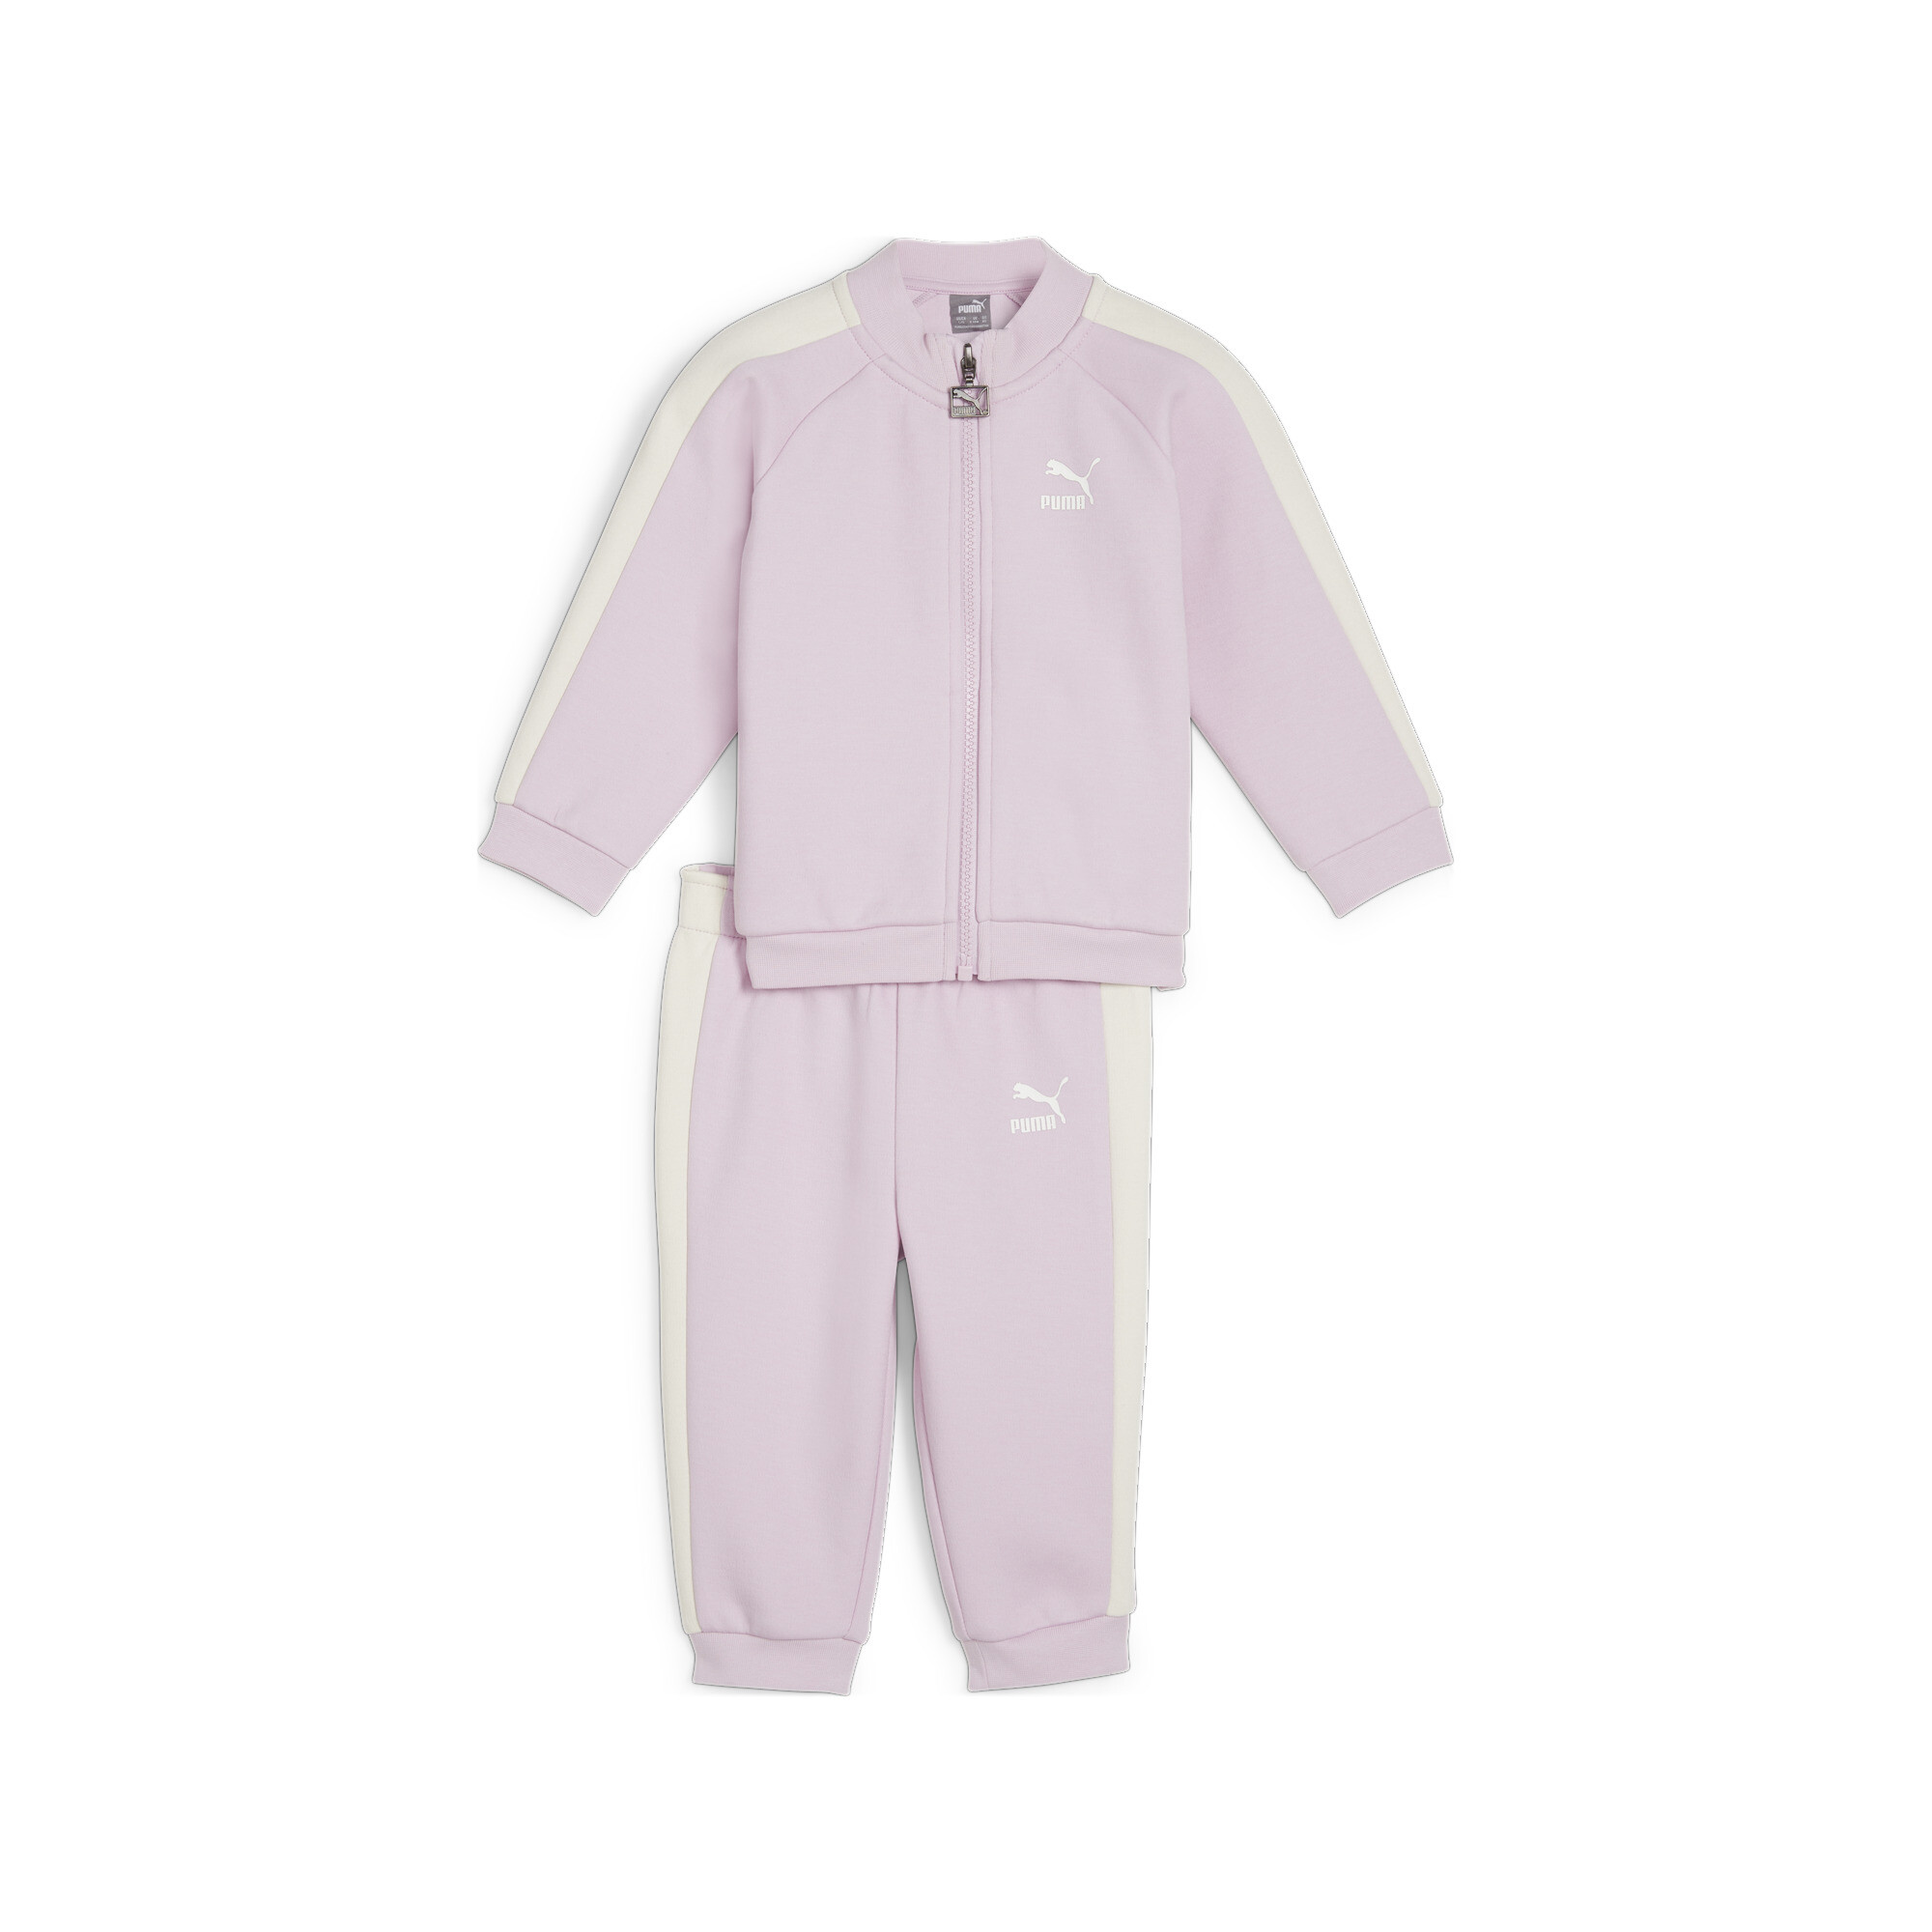 PUMA MINICATS T7 ICONIC Baby Tracksuit Set In 90 - Purple, Size 2-3 Youth